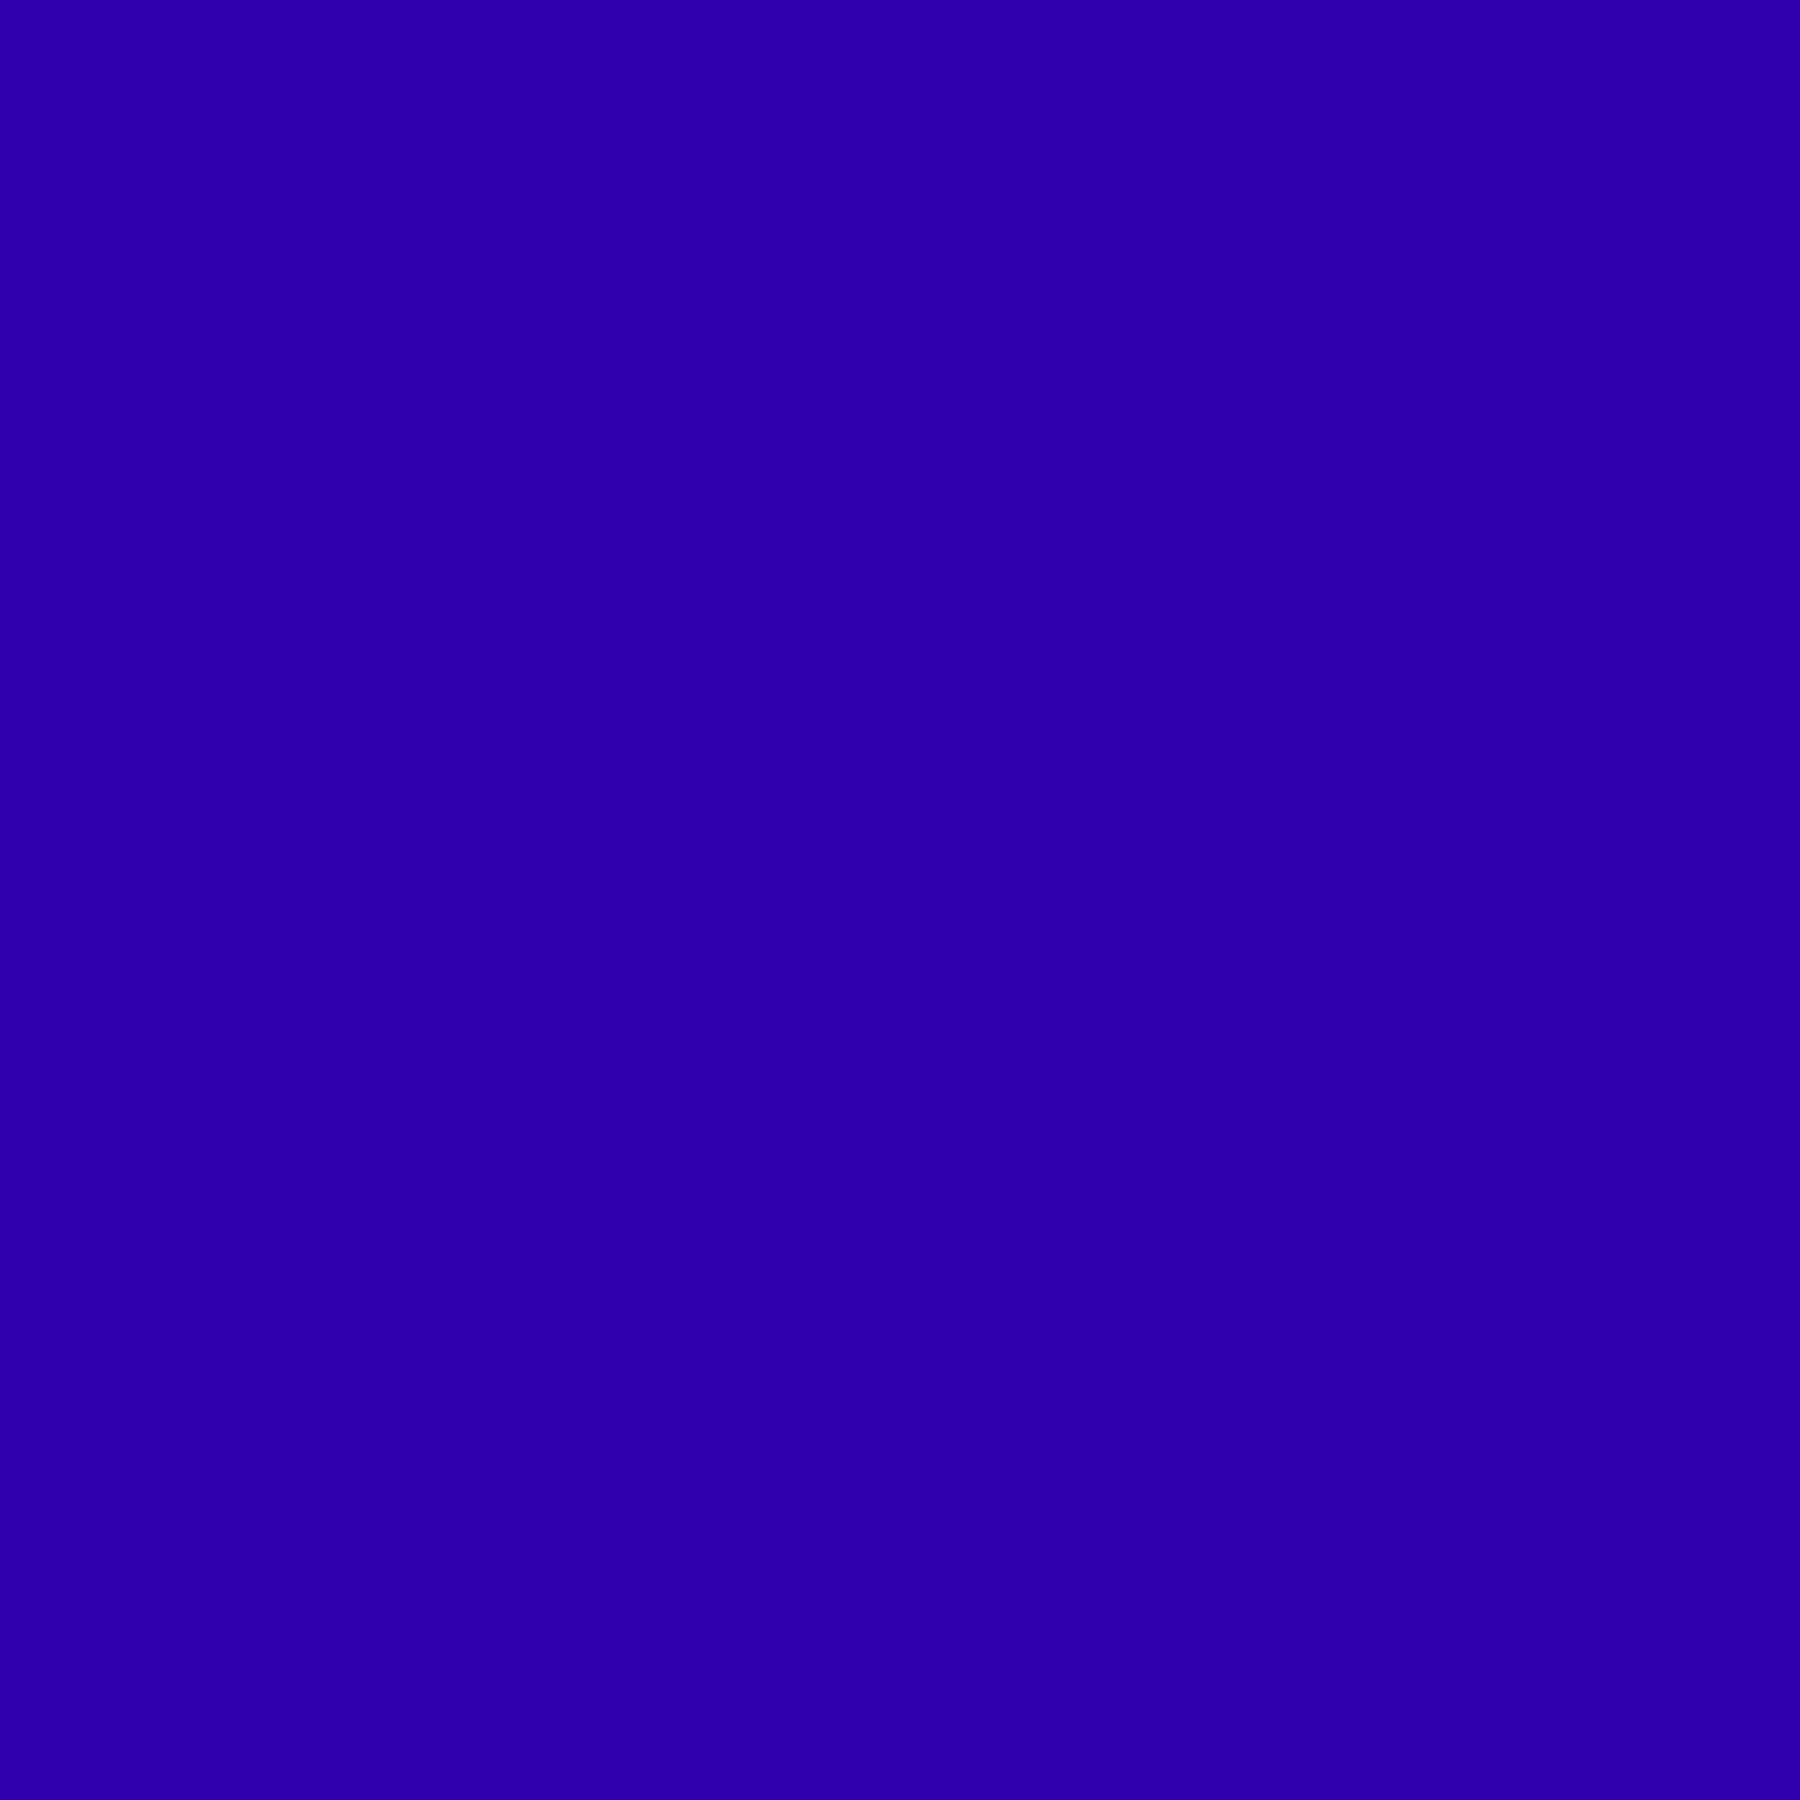 🩵 🅐🅝🅝🅐 ⒷⒺⓁ 🅛🅔🅔  on X: #ColorOfTheDay #October18th @pantone 2736  #Ultramarine the most expensive #color during #Renaissance #ColorInspires   / X